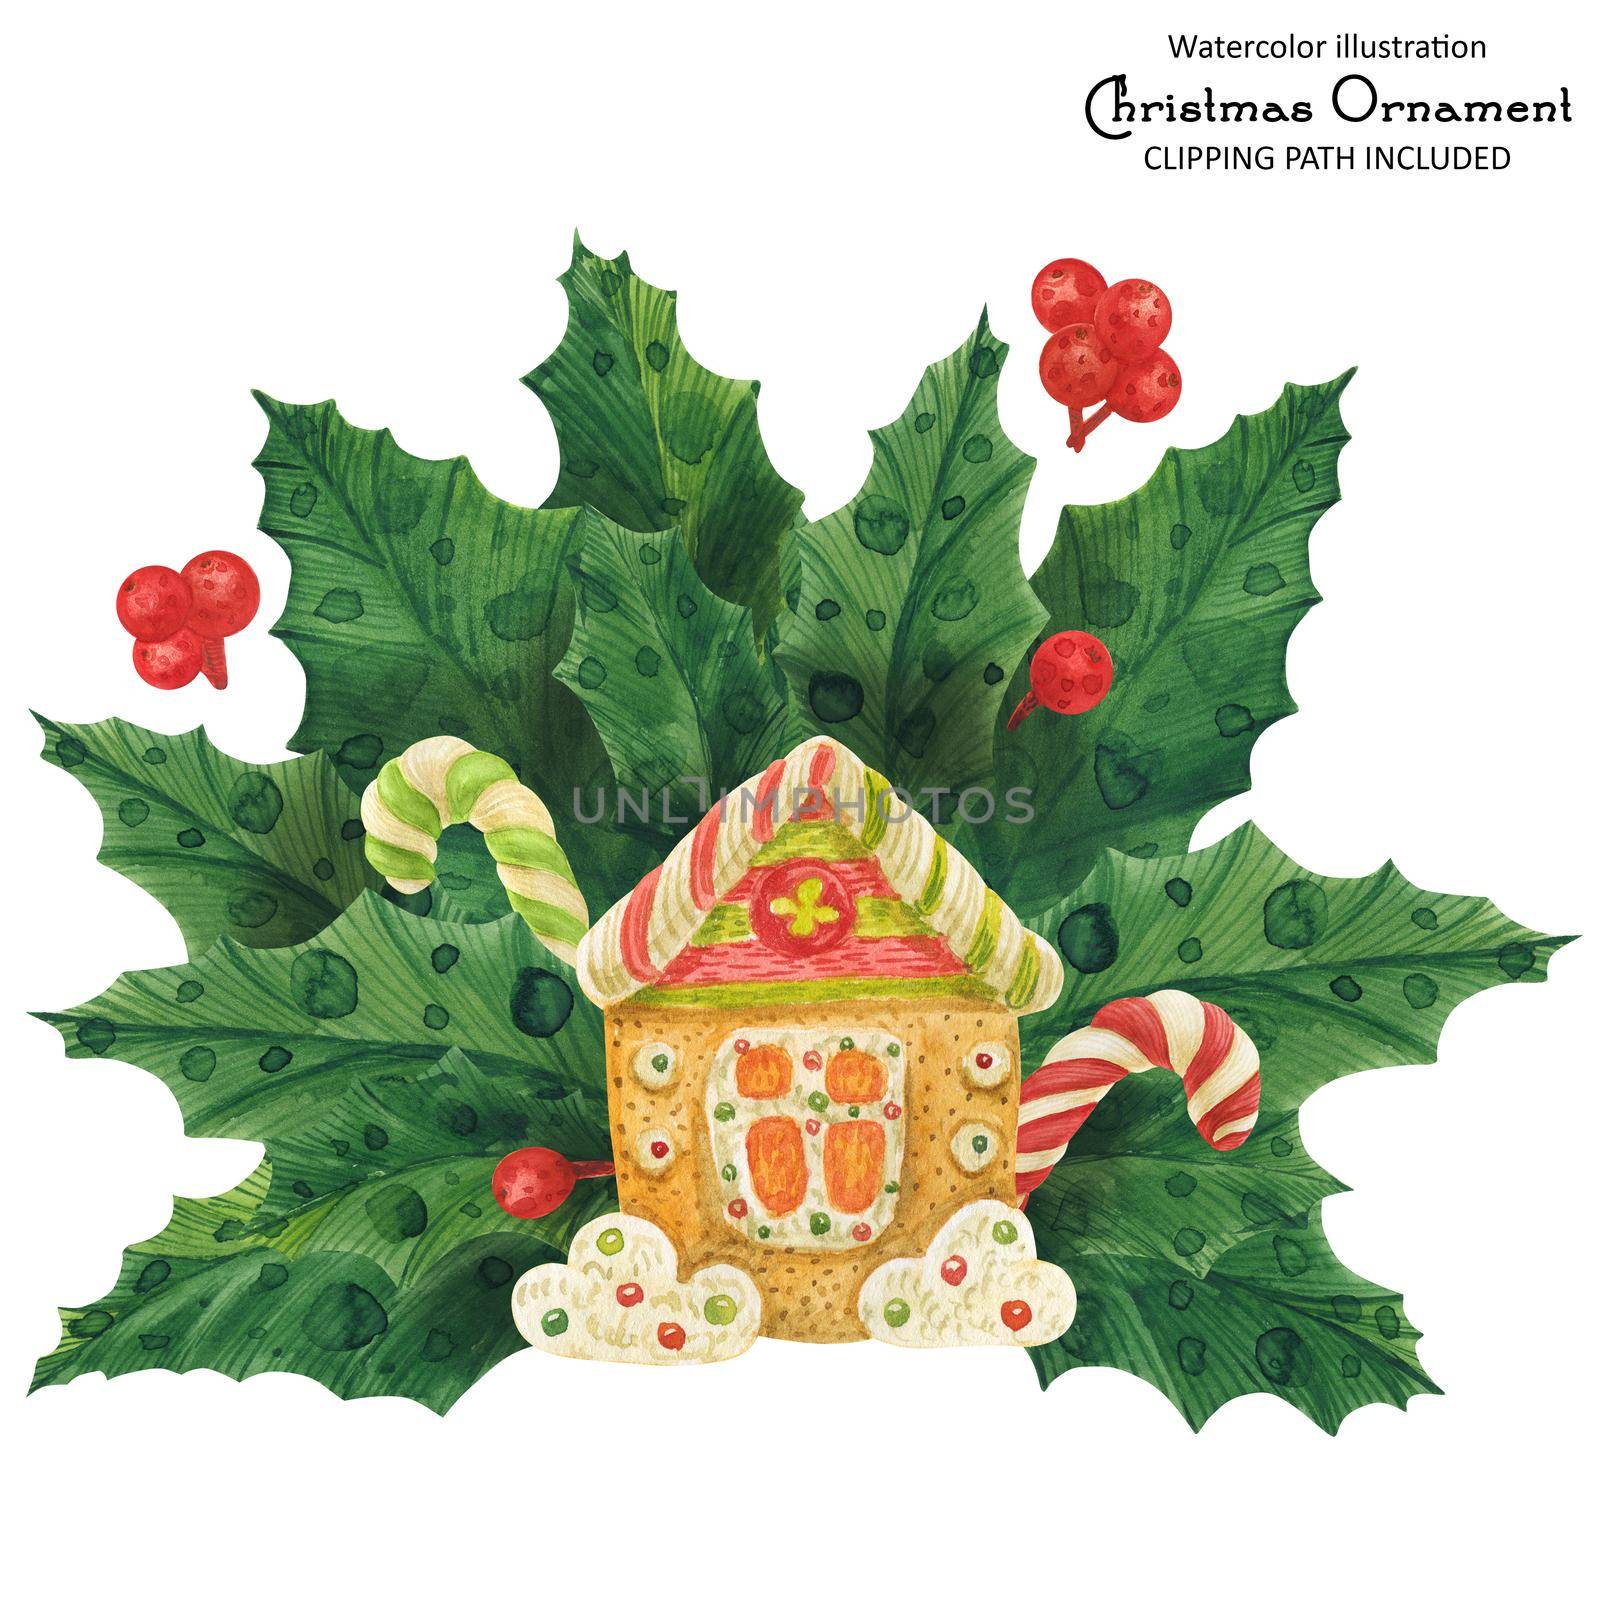 Christmas holly bouquet with gingerbread house and candy canes, isolated watercolor illustration and clipping path